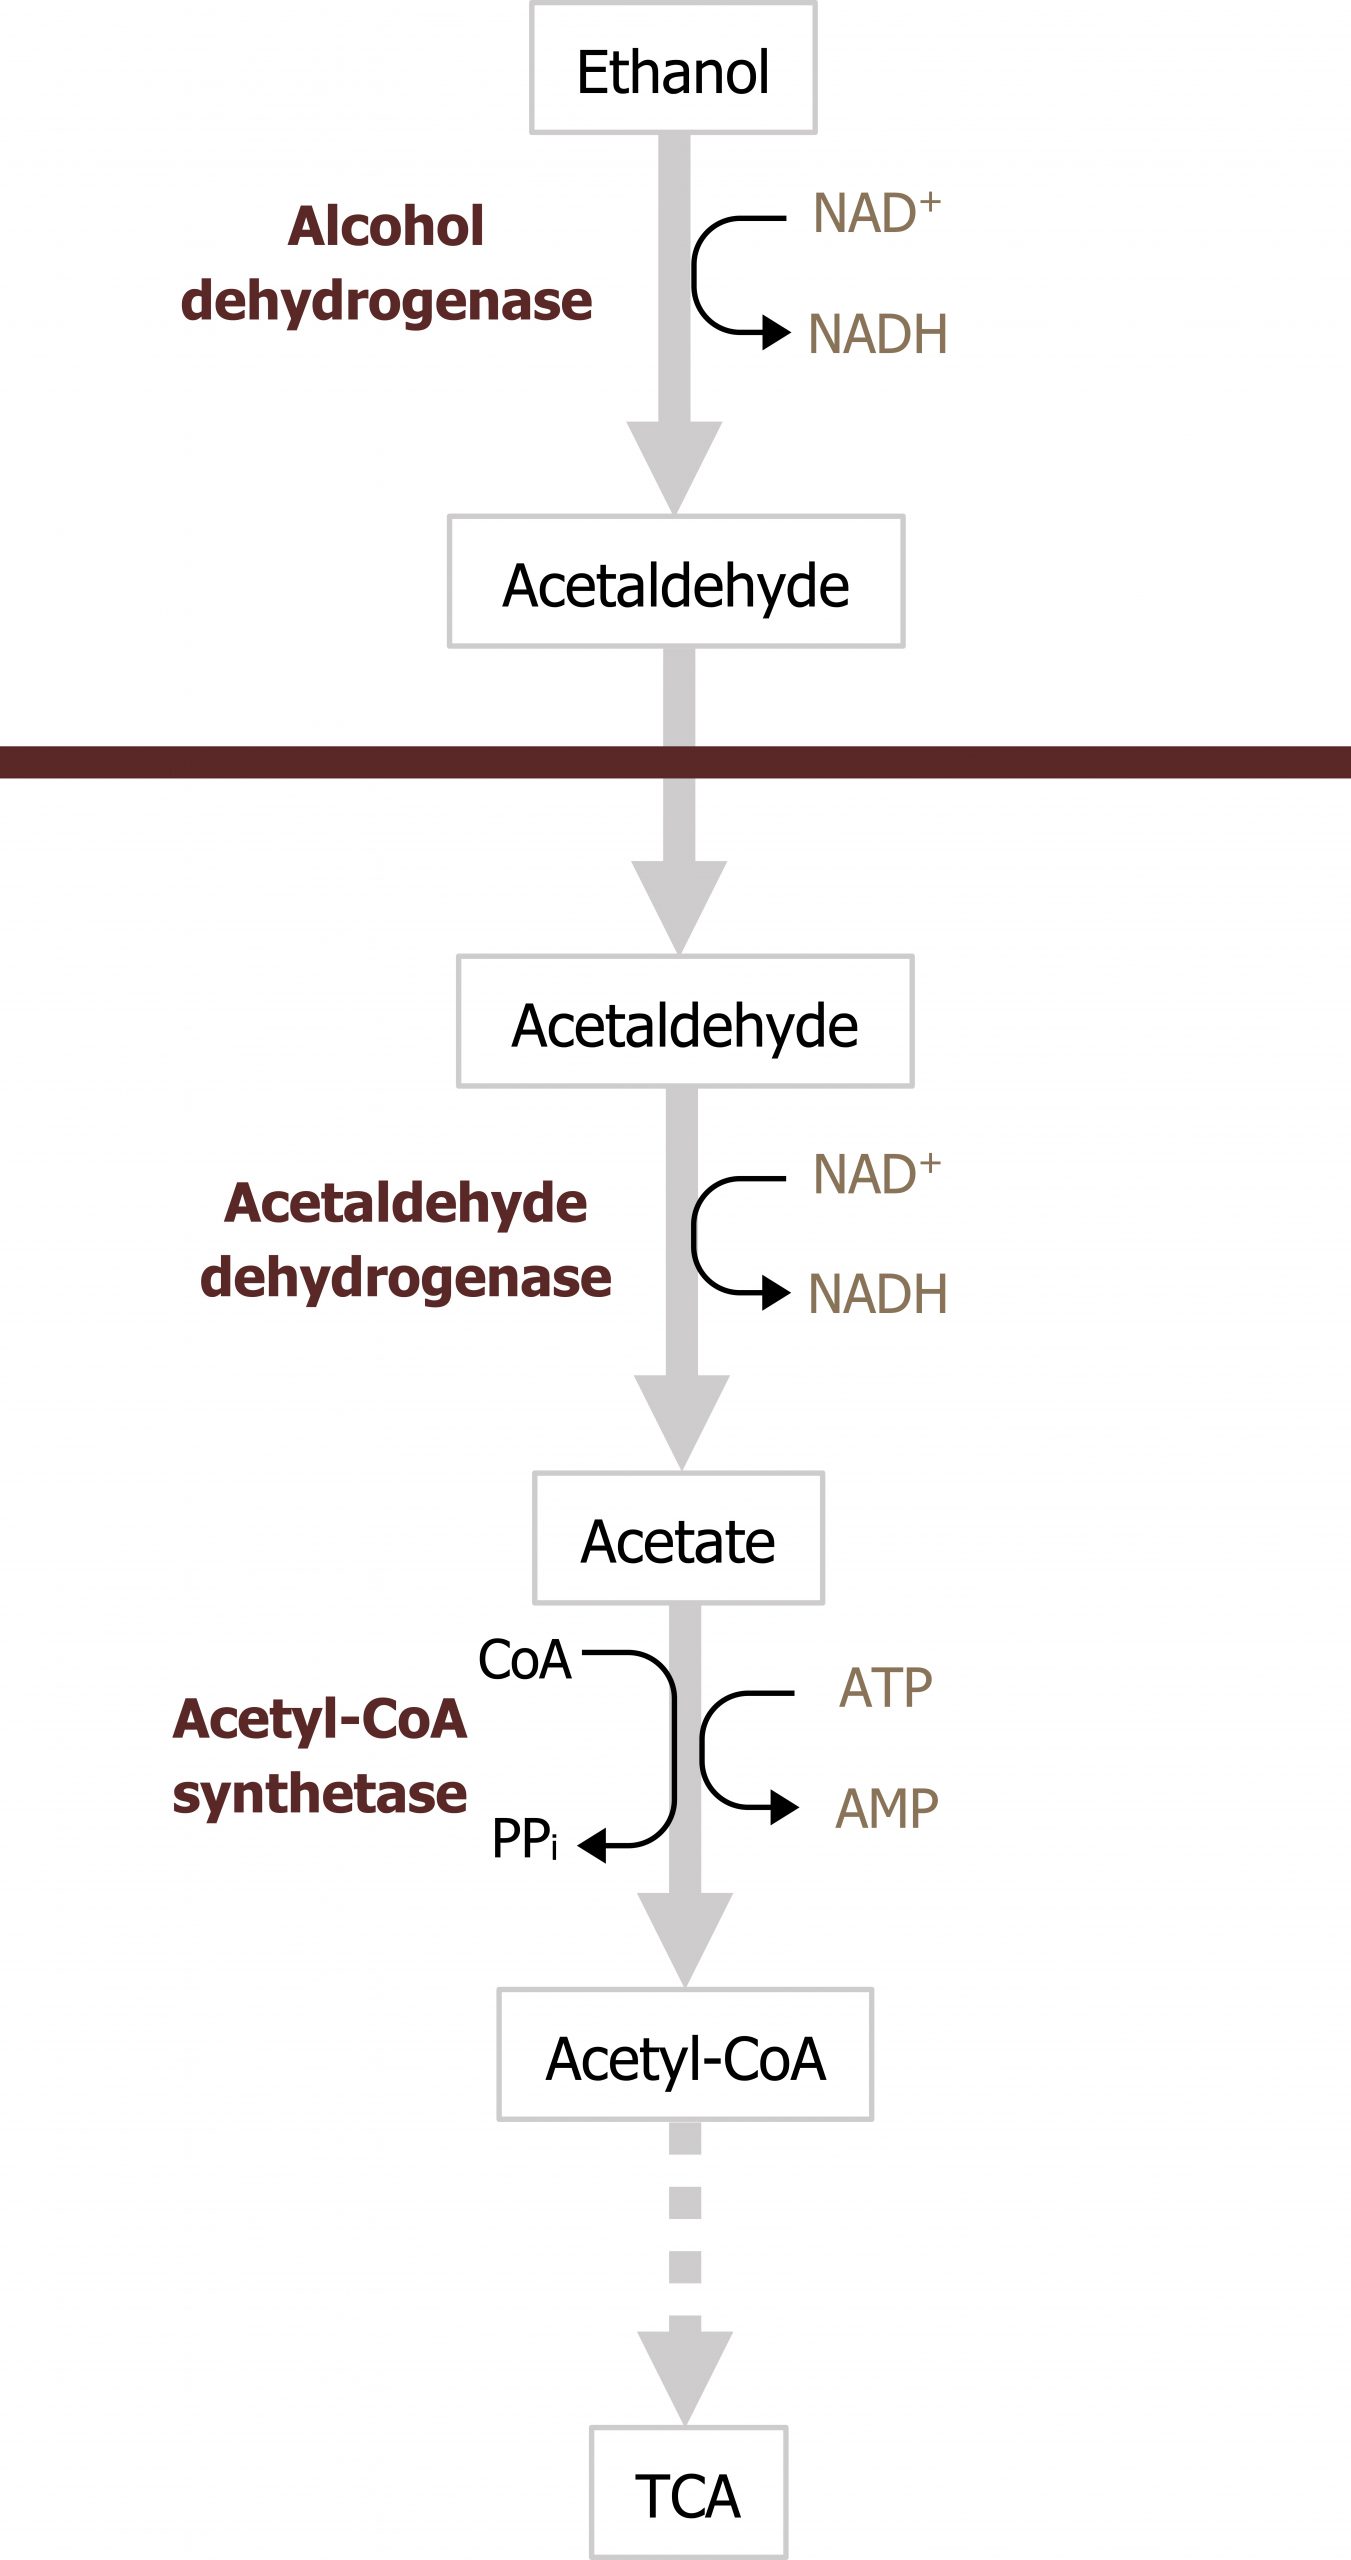 Ethanol arrow with NAD+ arrow NADH and enzyme alcohol dehydrogenase to acetaldehyde from cytosol into mitochondria arrow with NAD+ arrow NADH and enzyme acetaldehyde dehydrogenase to acetate arrow with ATP arrow AMP, CoA arrow PPi, ane enzyme acetyl-coA synthetase to acetyl-CoA arrow TCA.